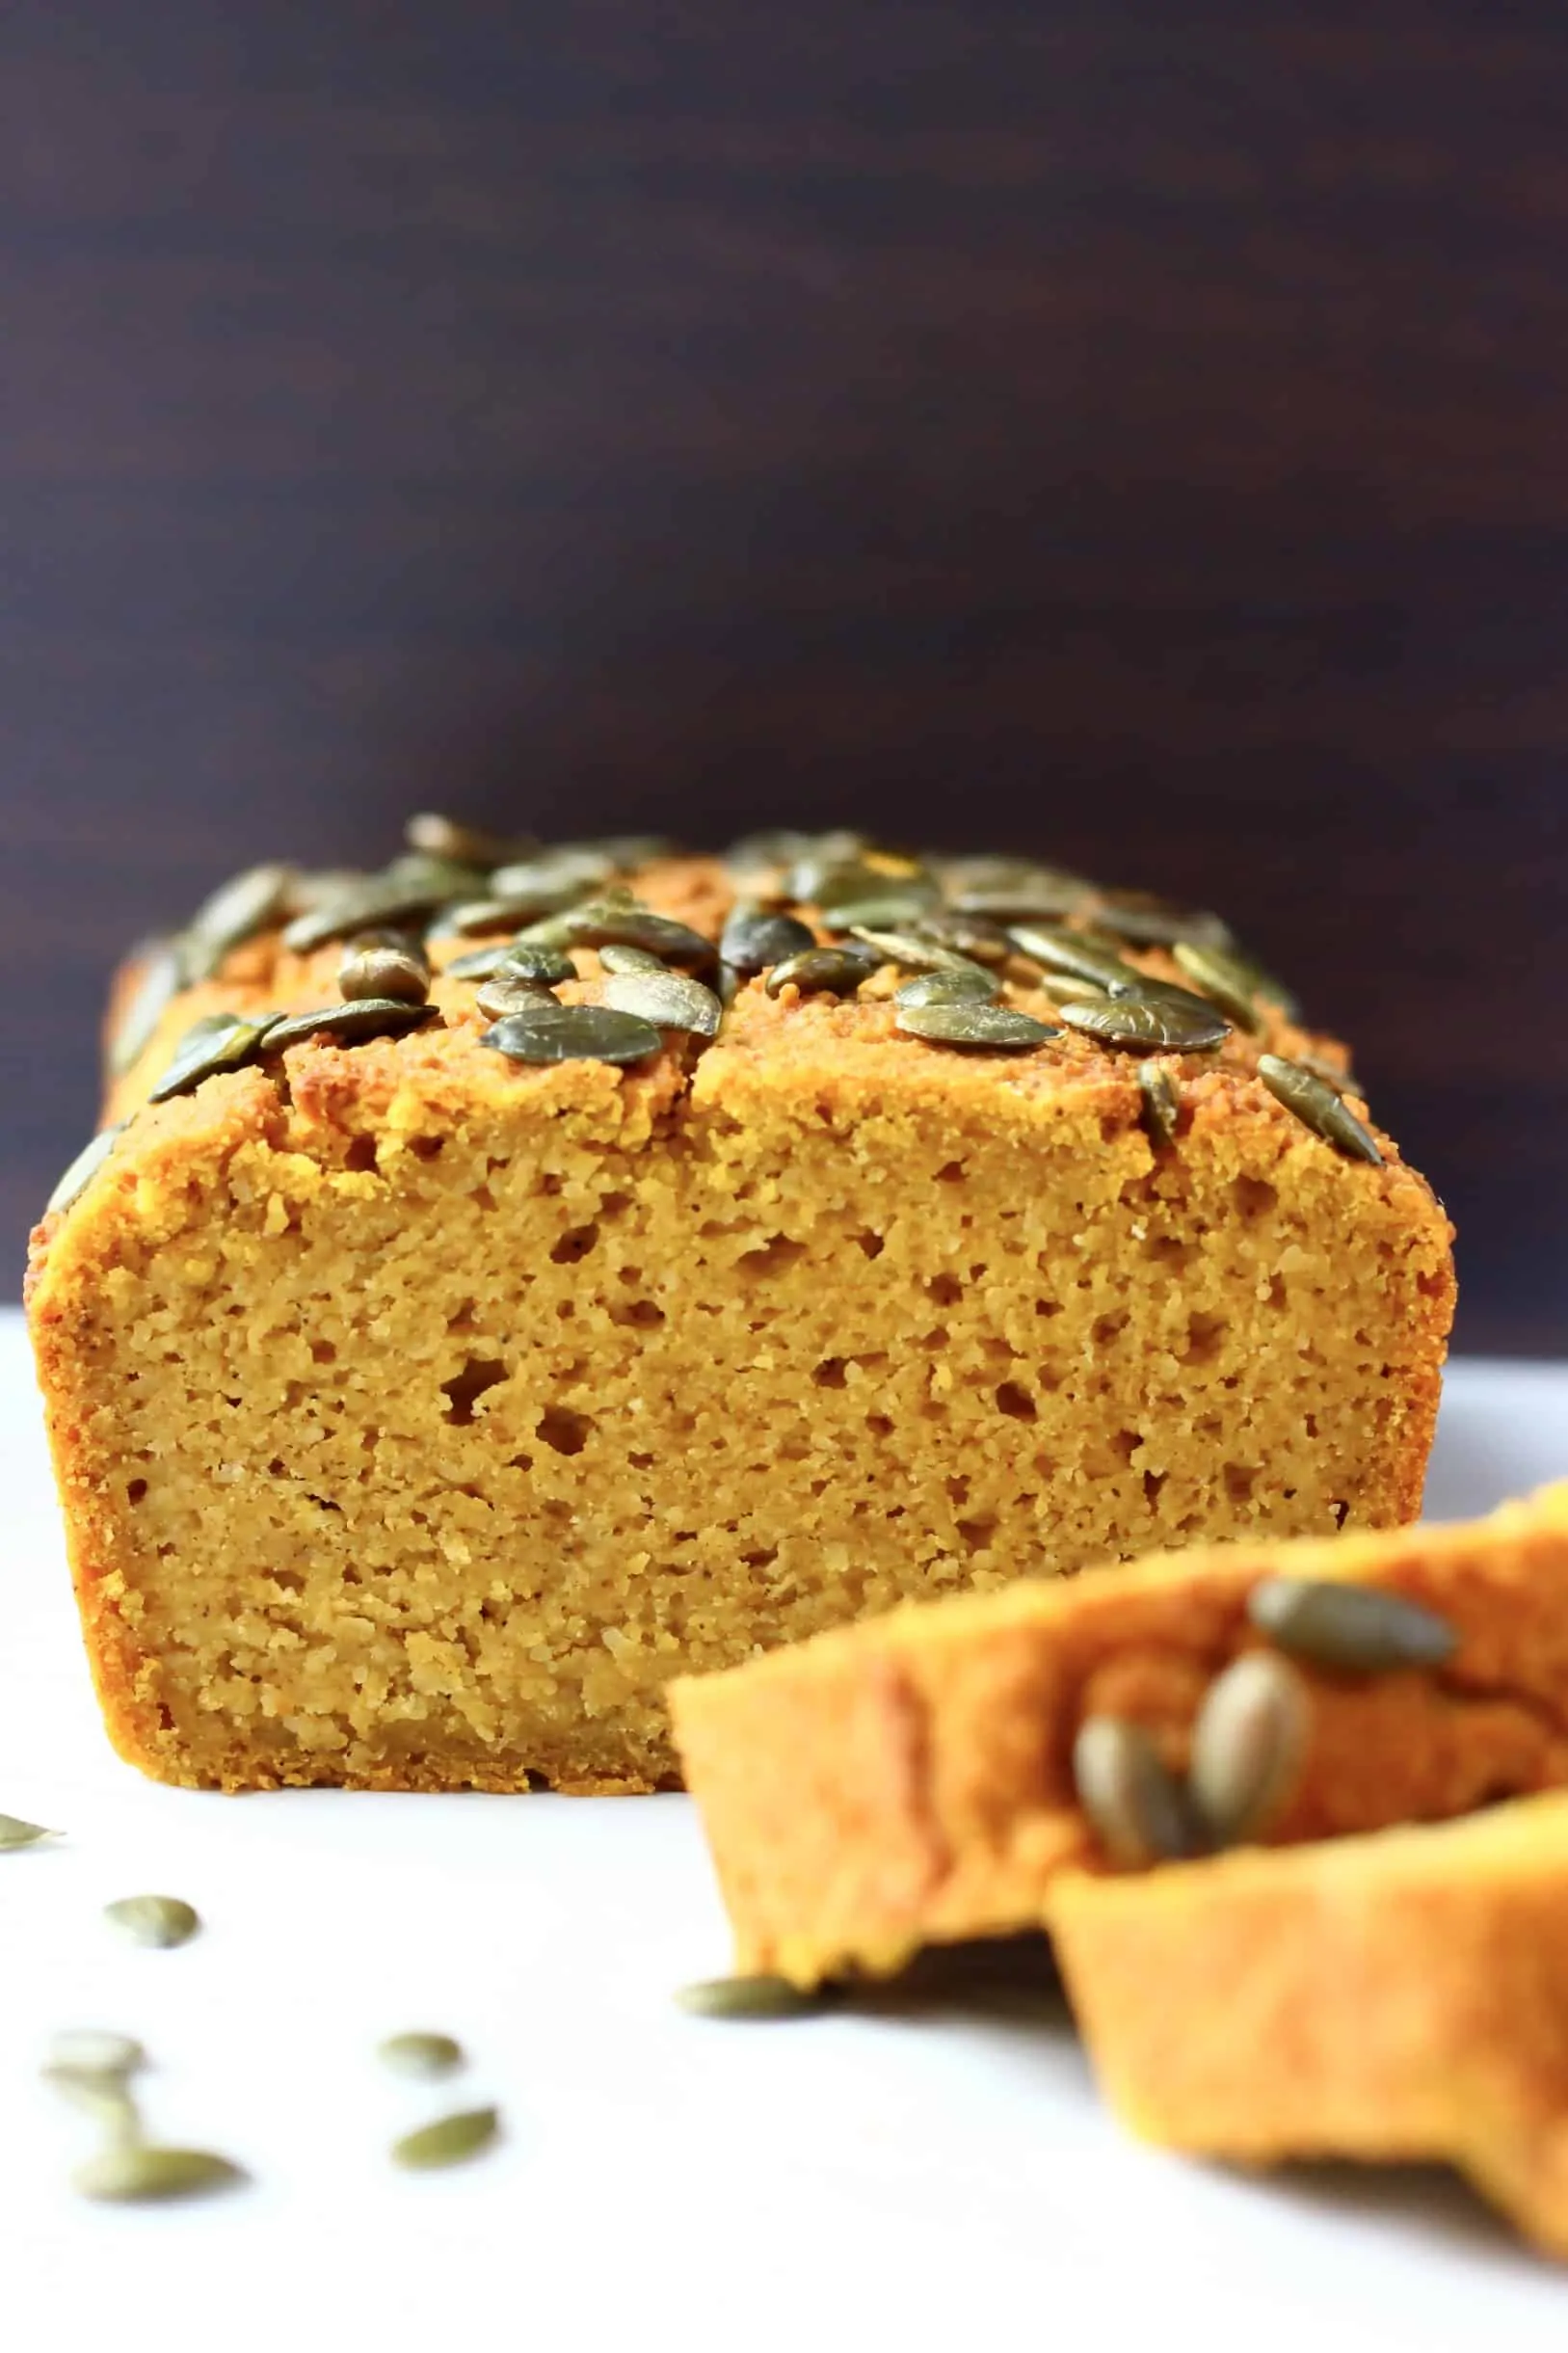 A sliced loaf of gluten-free vegan pumpkin bread topped with pumpkin seeds with two slices next to it